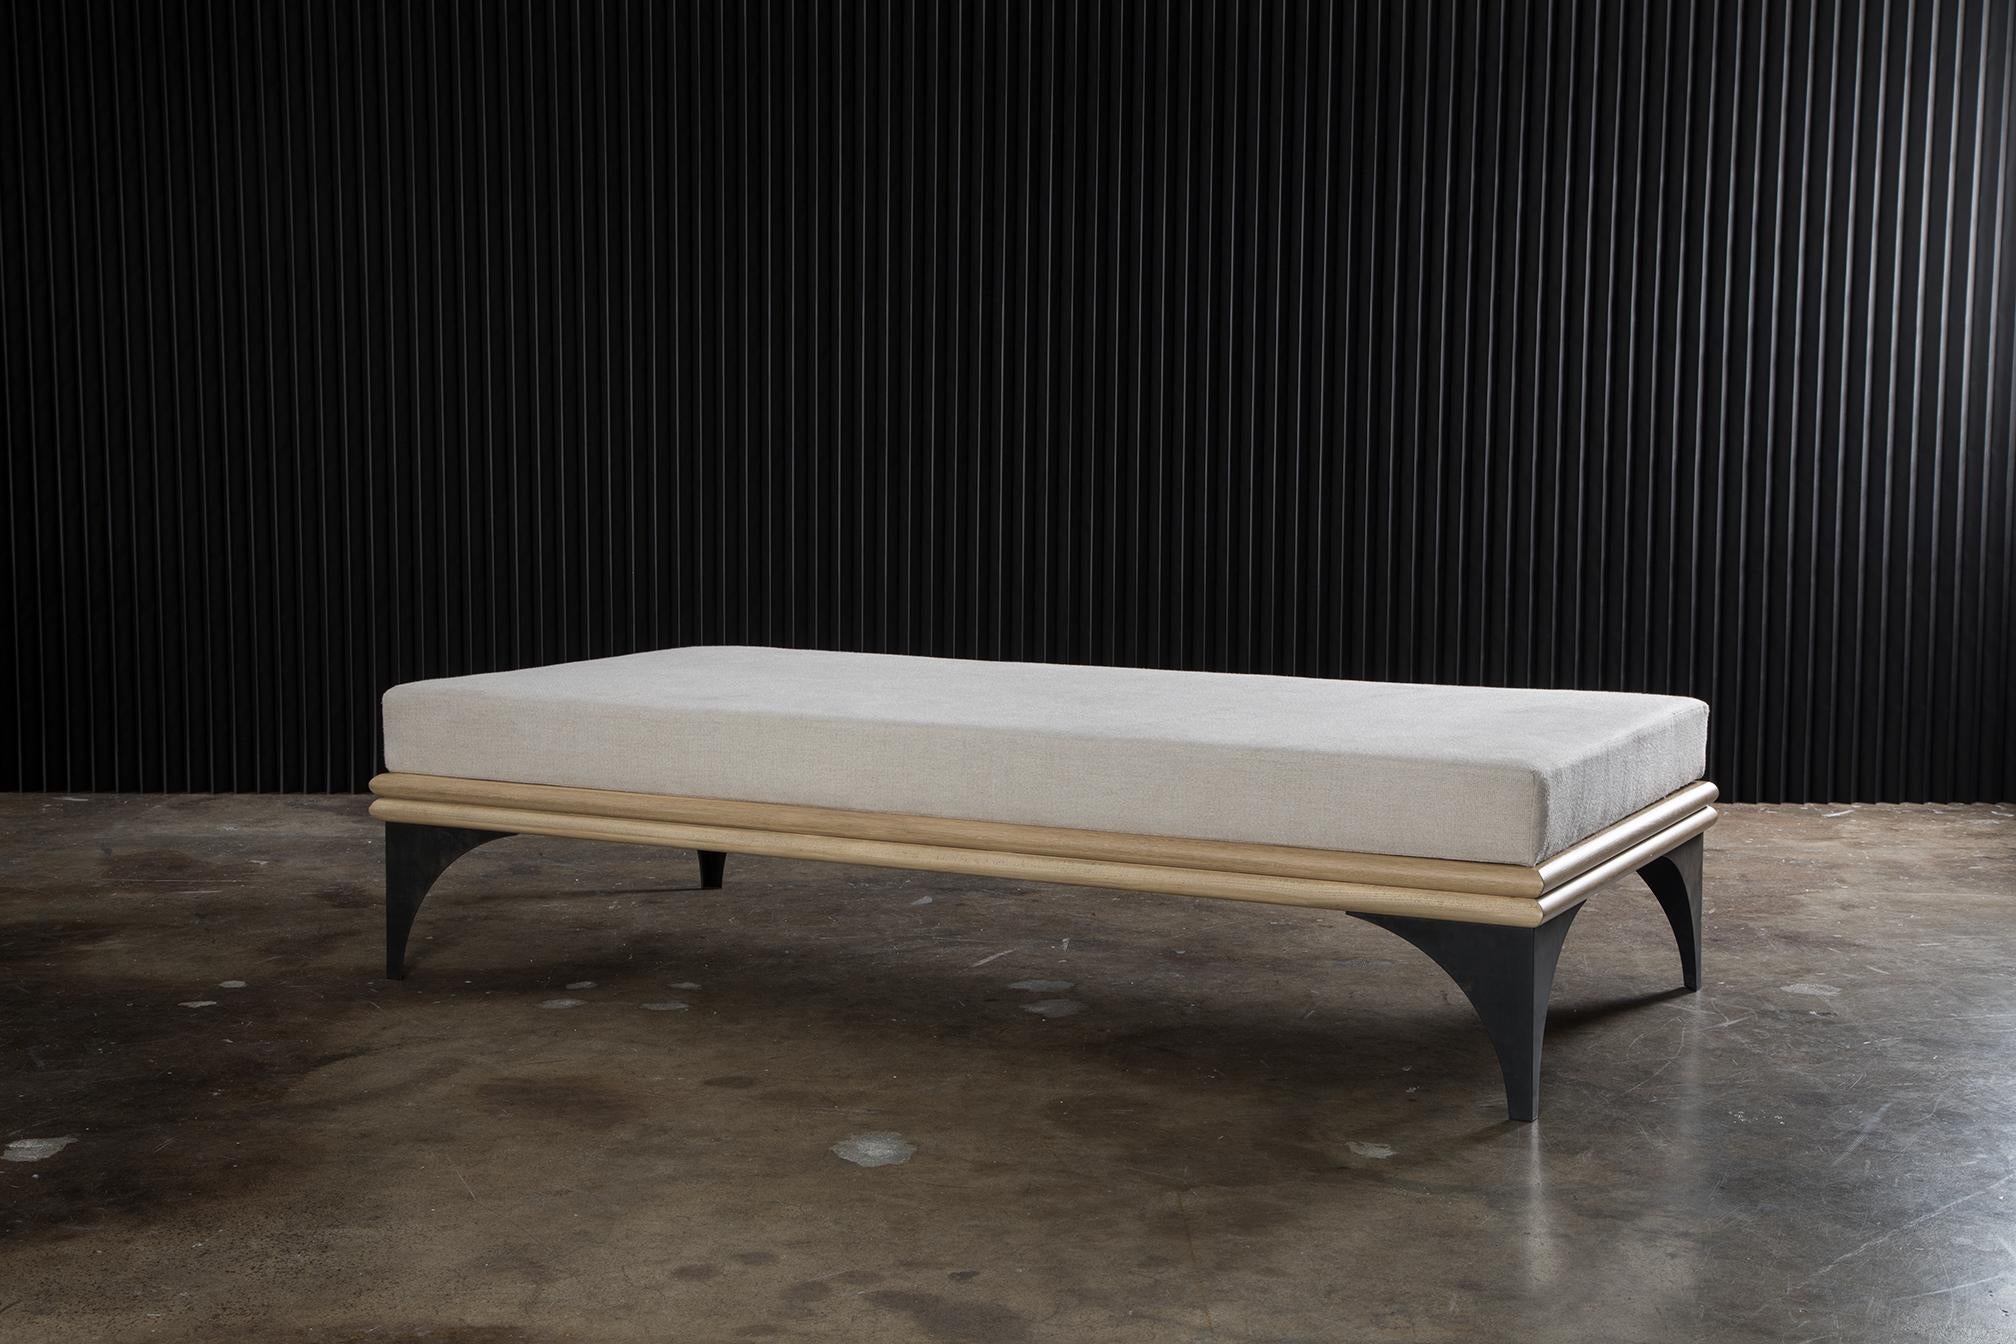 The daybed that started it all. Initially designed for her own home, Kelly was immediately inspired by the collaboration with her carpenter and decided to build on the concept. The Sonia Daybed is named after the French fashion designer, Sonia